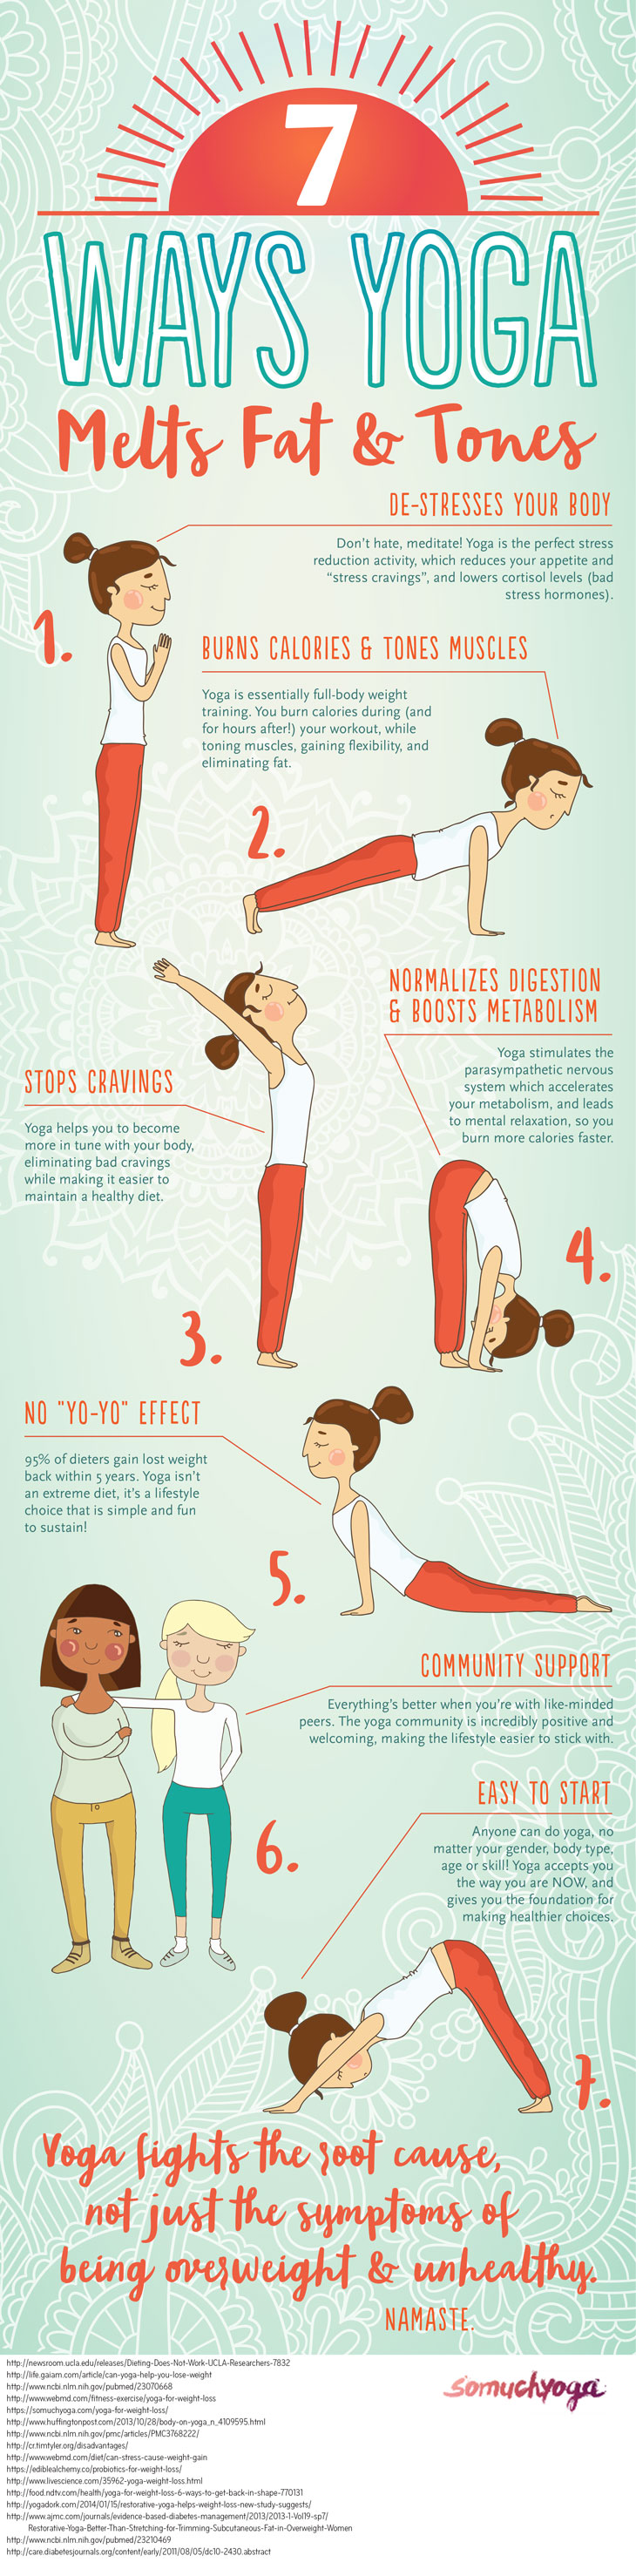 Yoga-for-weight-loss-infographic